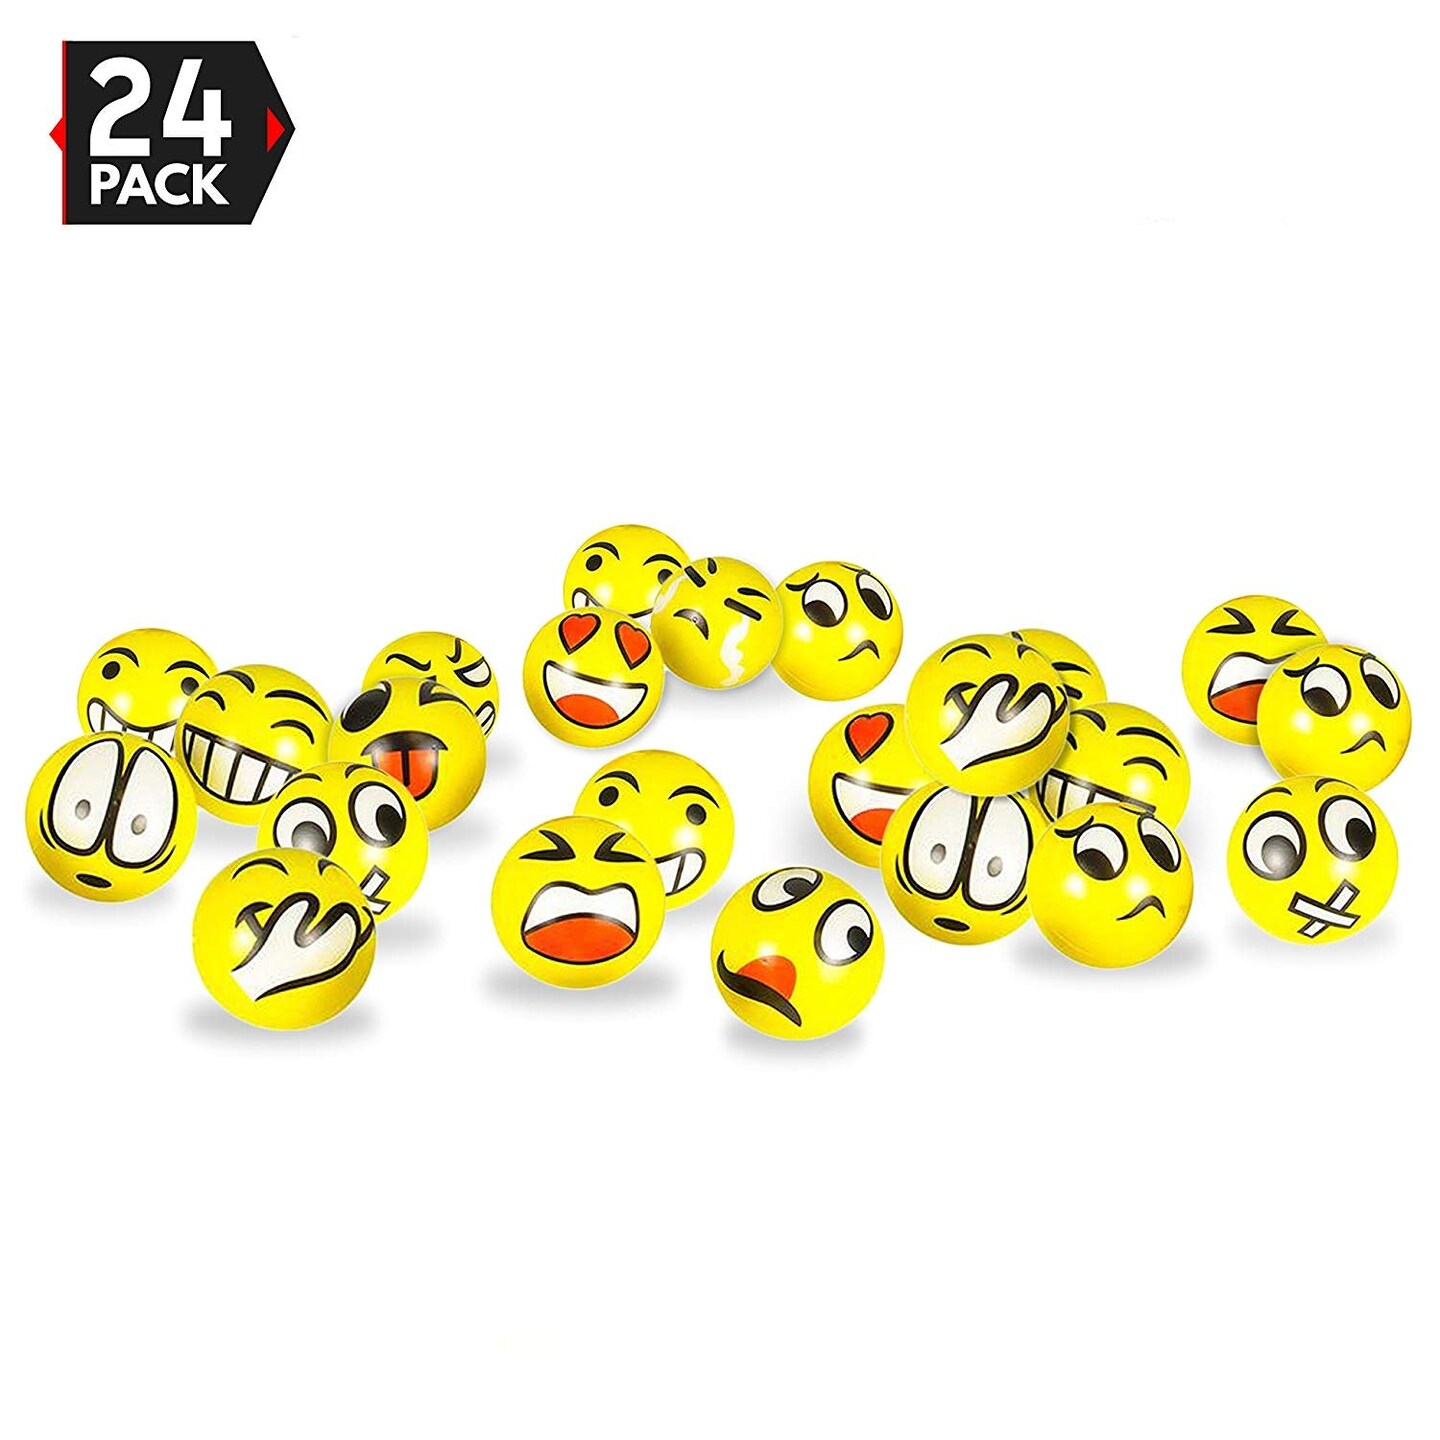 3&#x22; party pack emoji stress balls - stress reliever party favors, toy balls, party toys (24 pack)